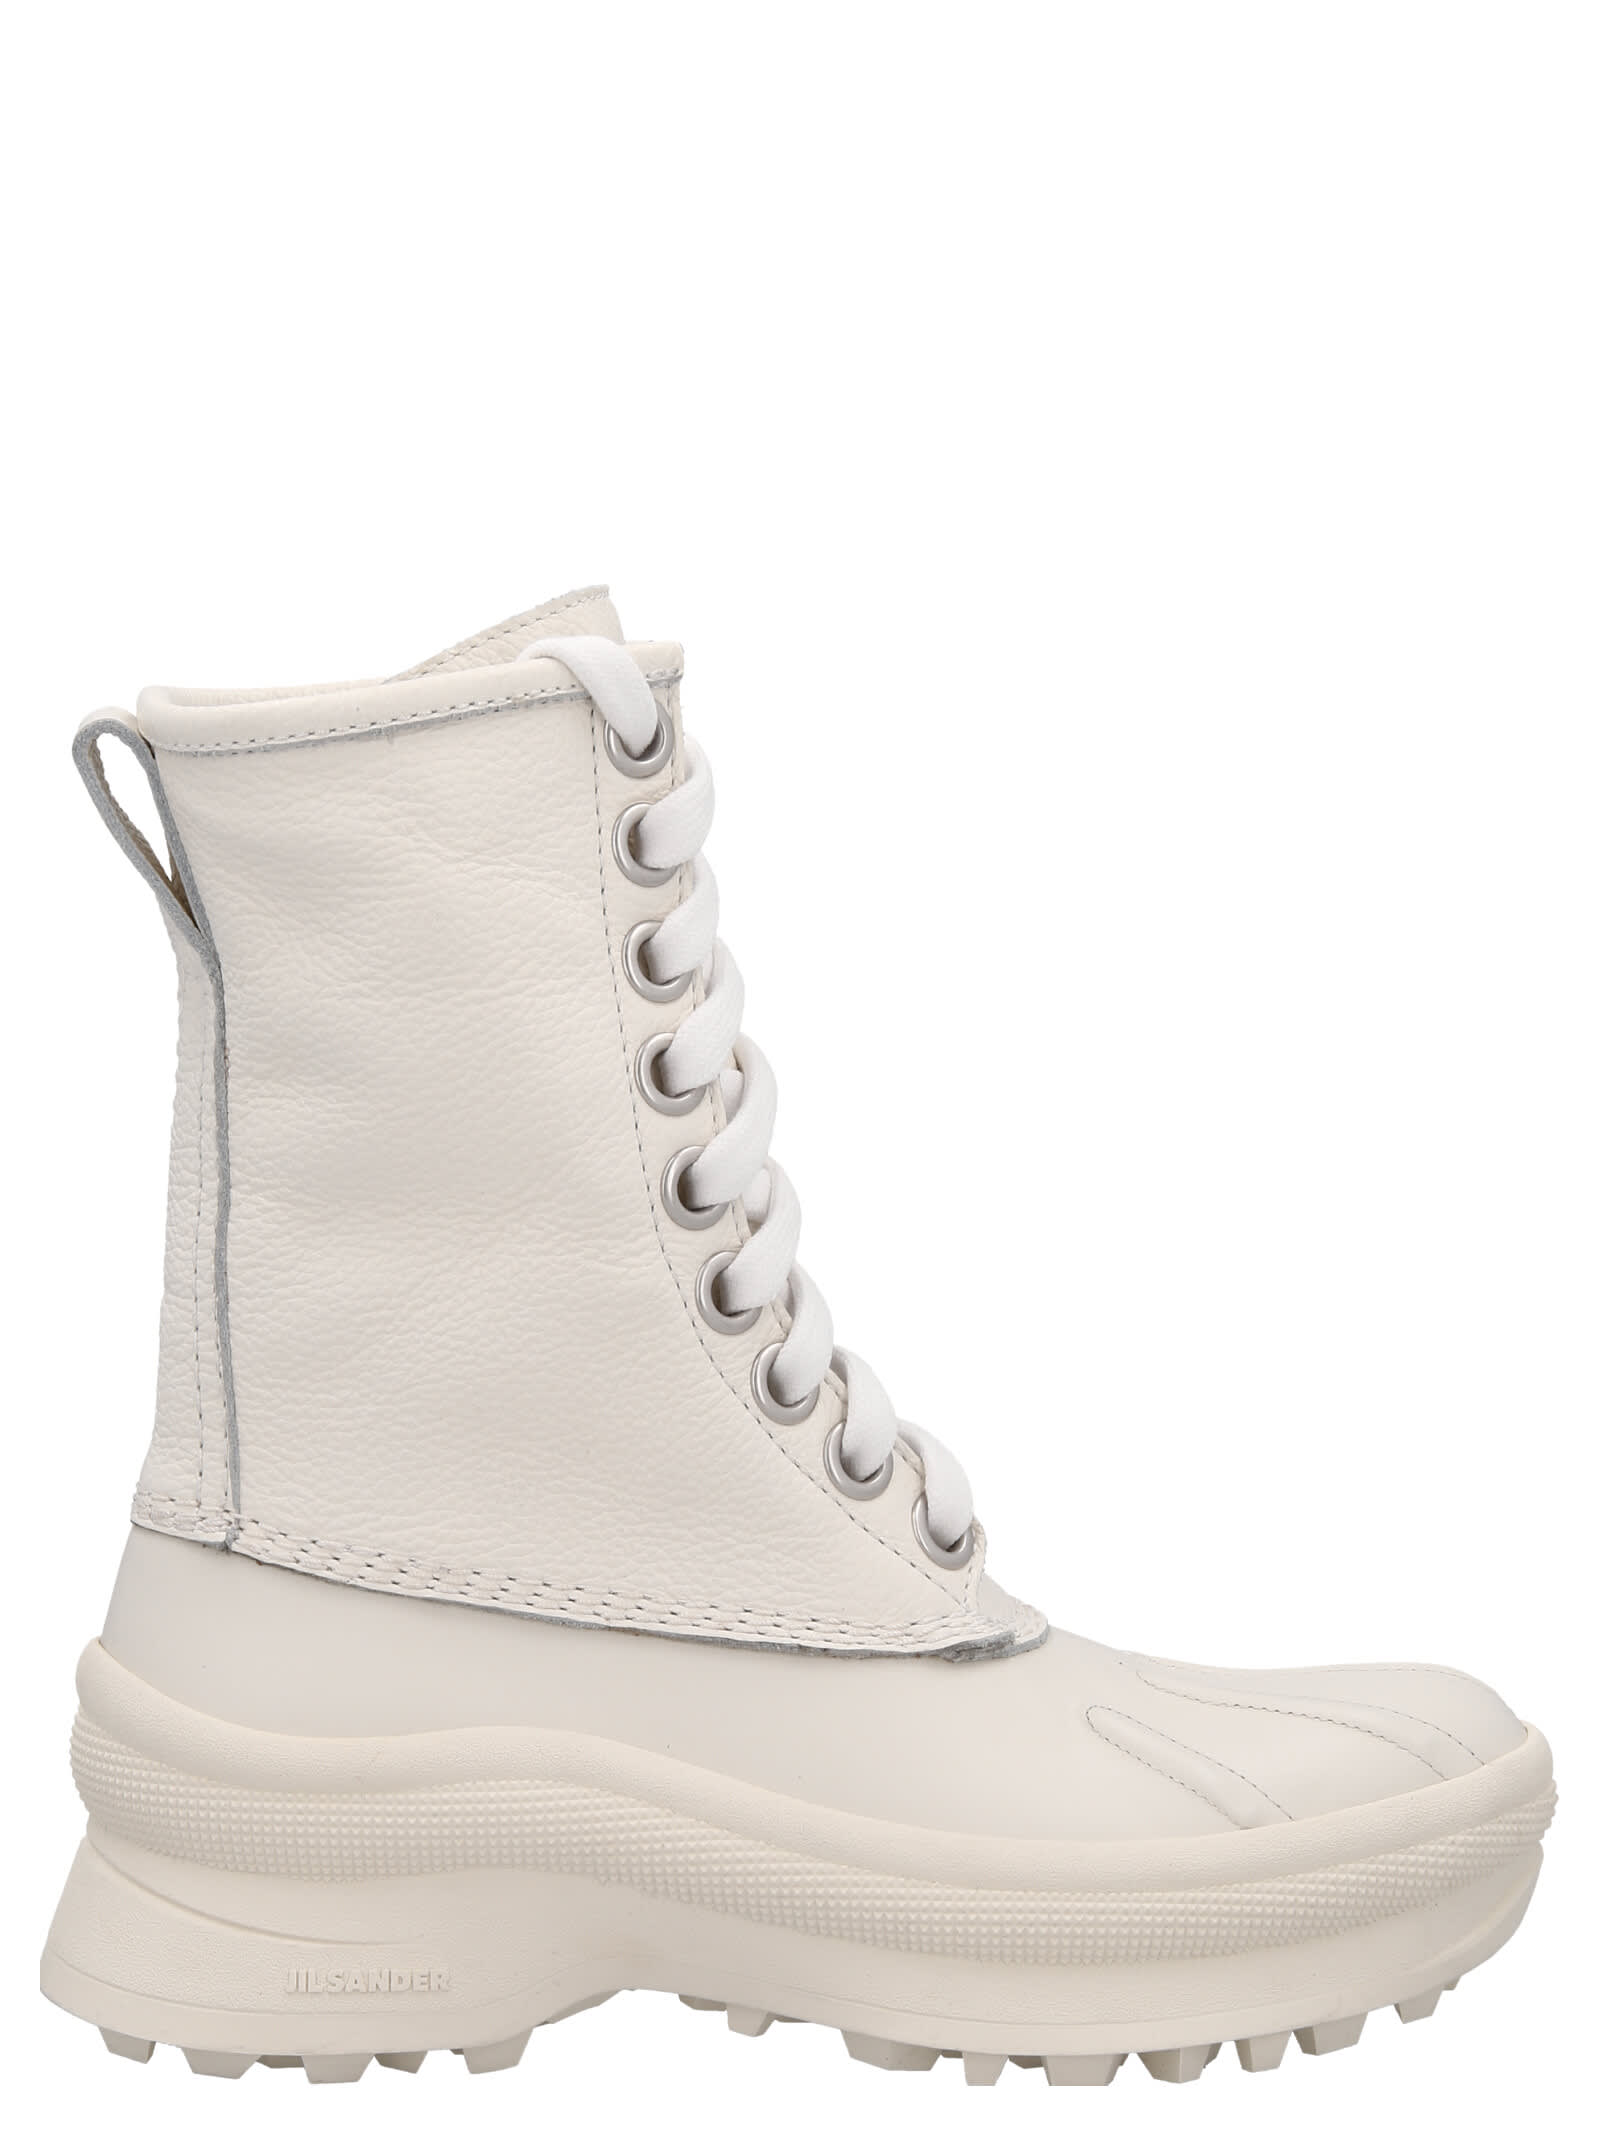 Jil Sander Rubber Leather Ankle Boots